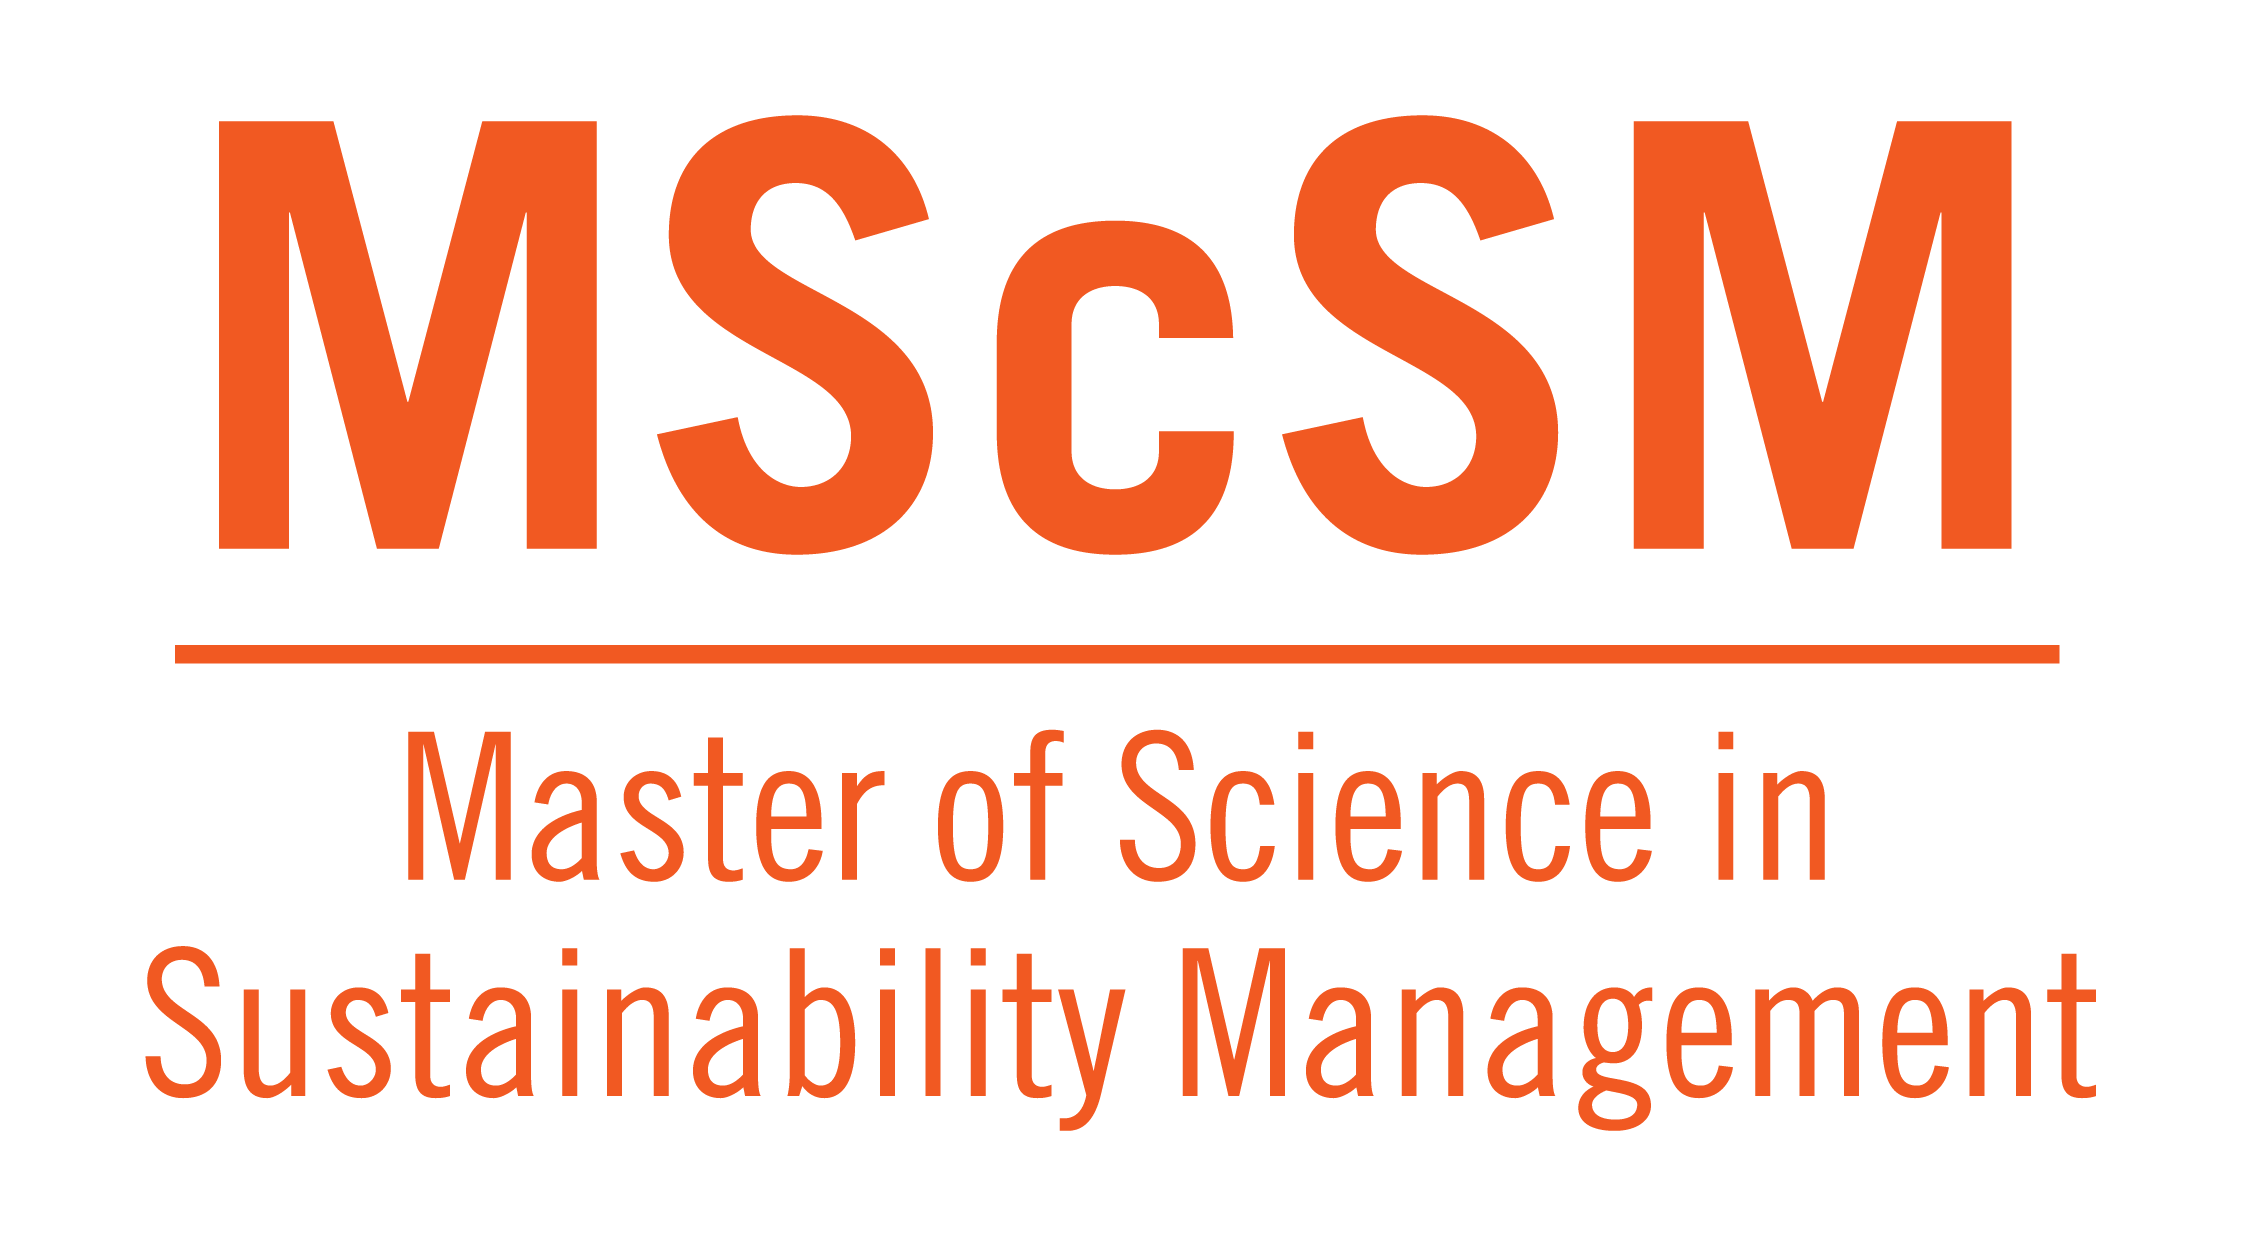 Master of Science in Sustainability Management (MScSM) - U of T